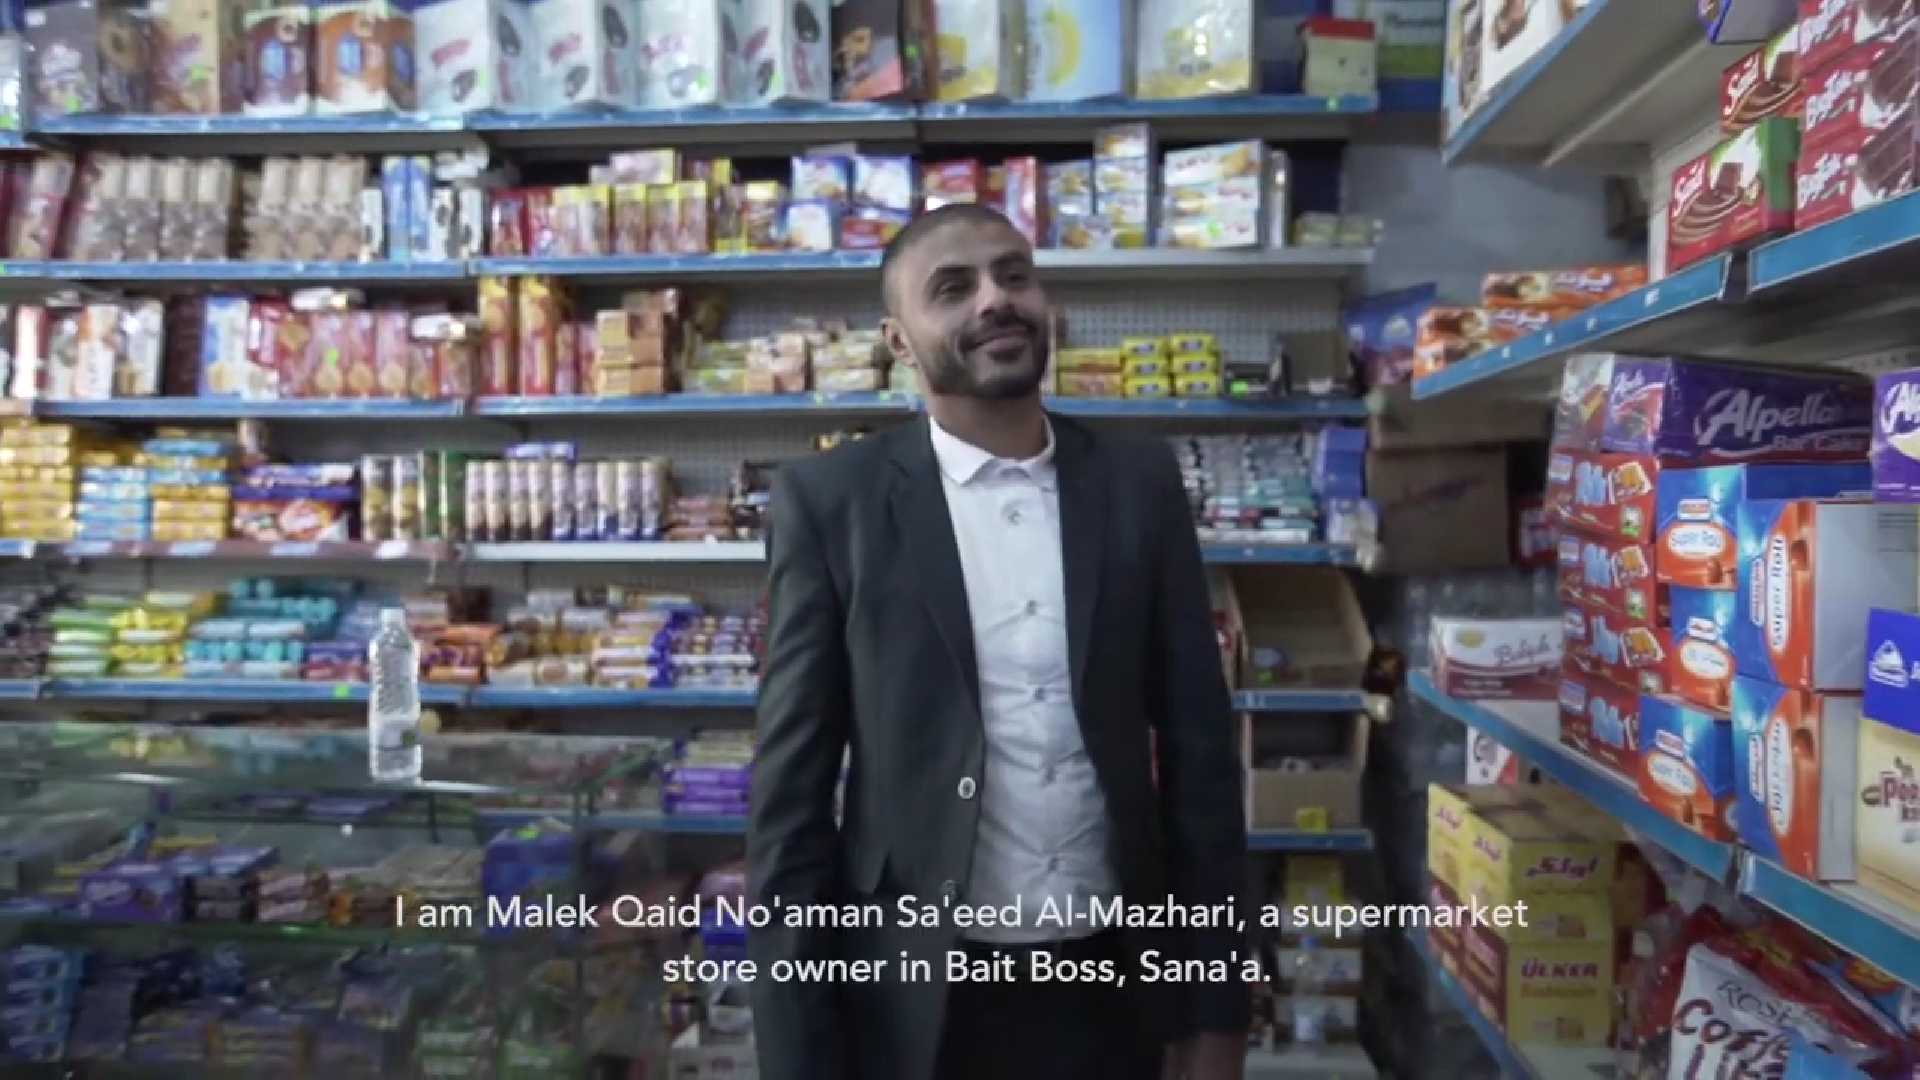 The story of entrepreneur Malik Qaid, in which he tells about his experience with microfinance.